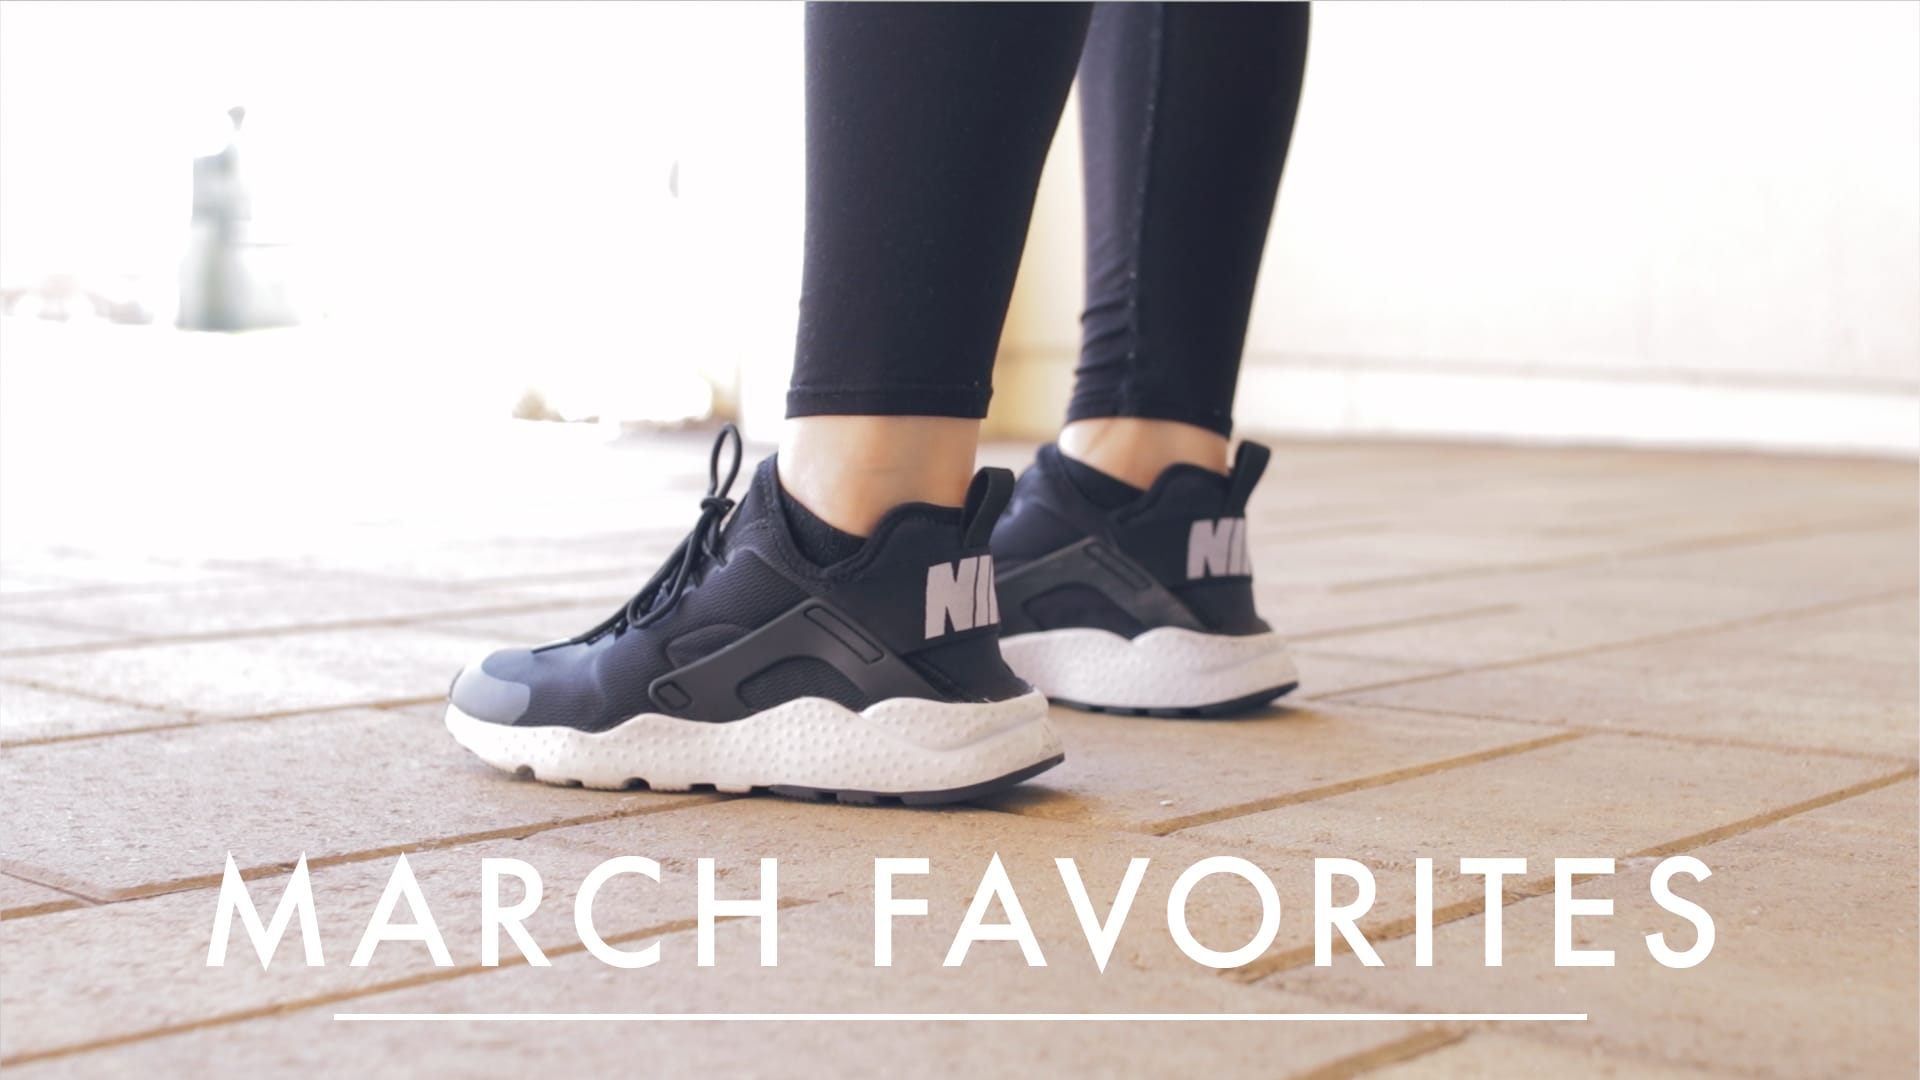 March Favorites